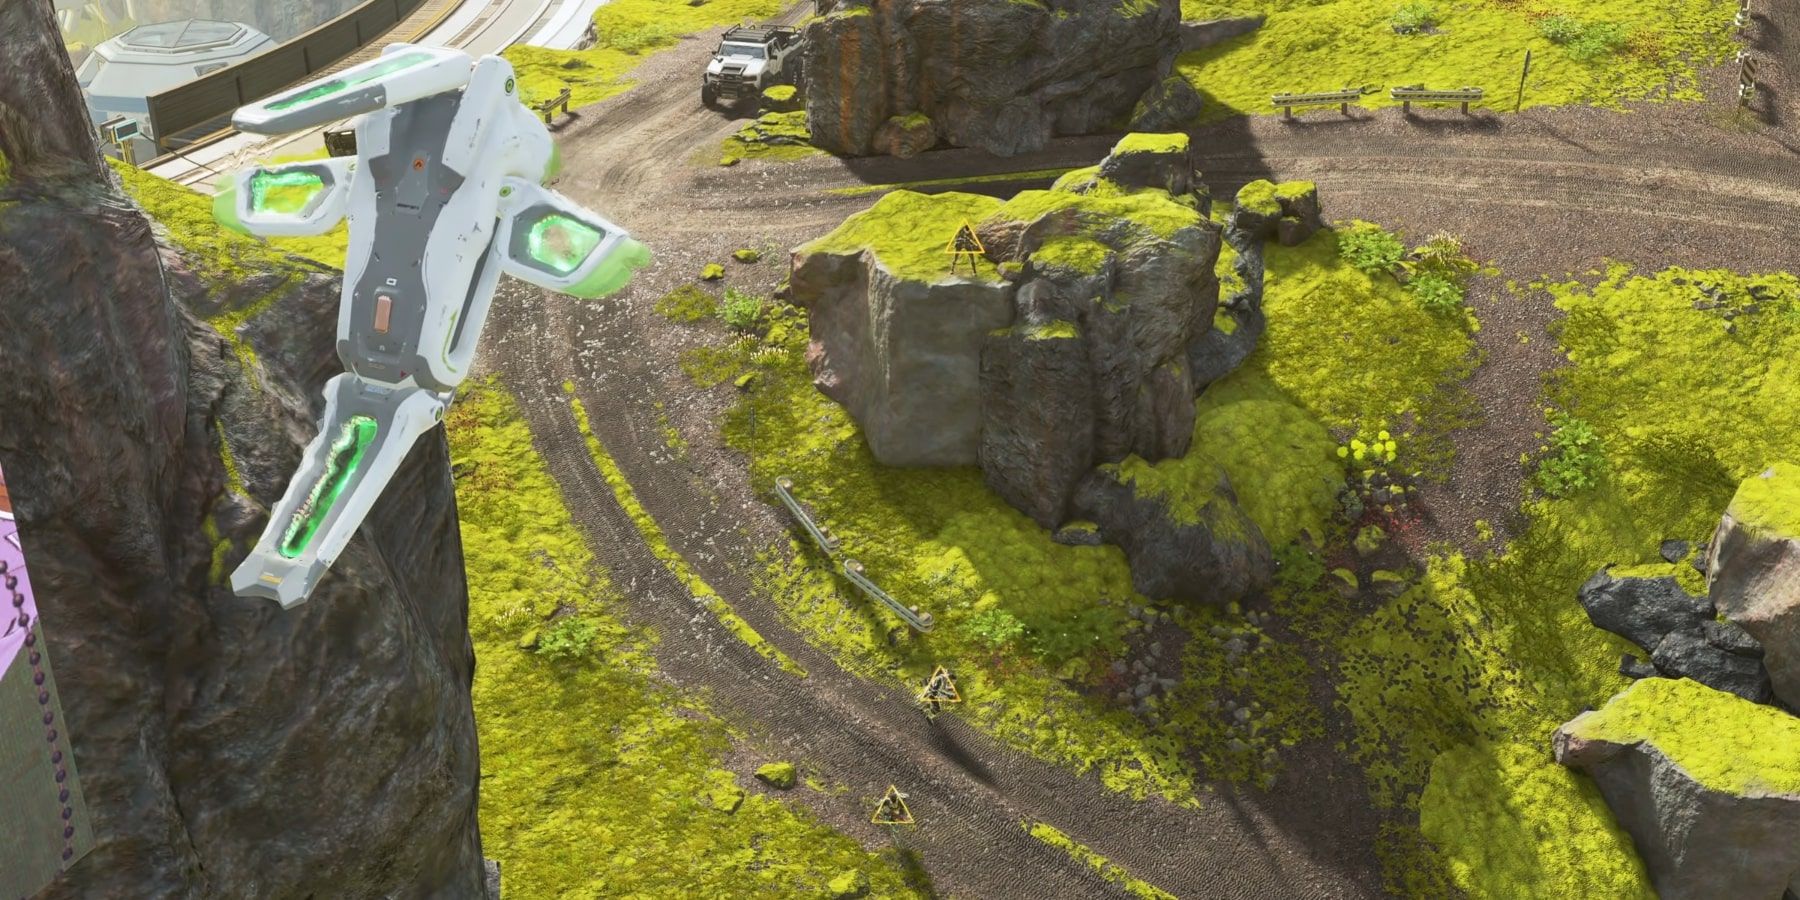 Crypto's Drone watches a canyon on World's Edge and scans three enemies among the rocks.